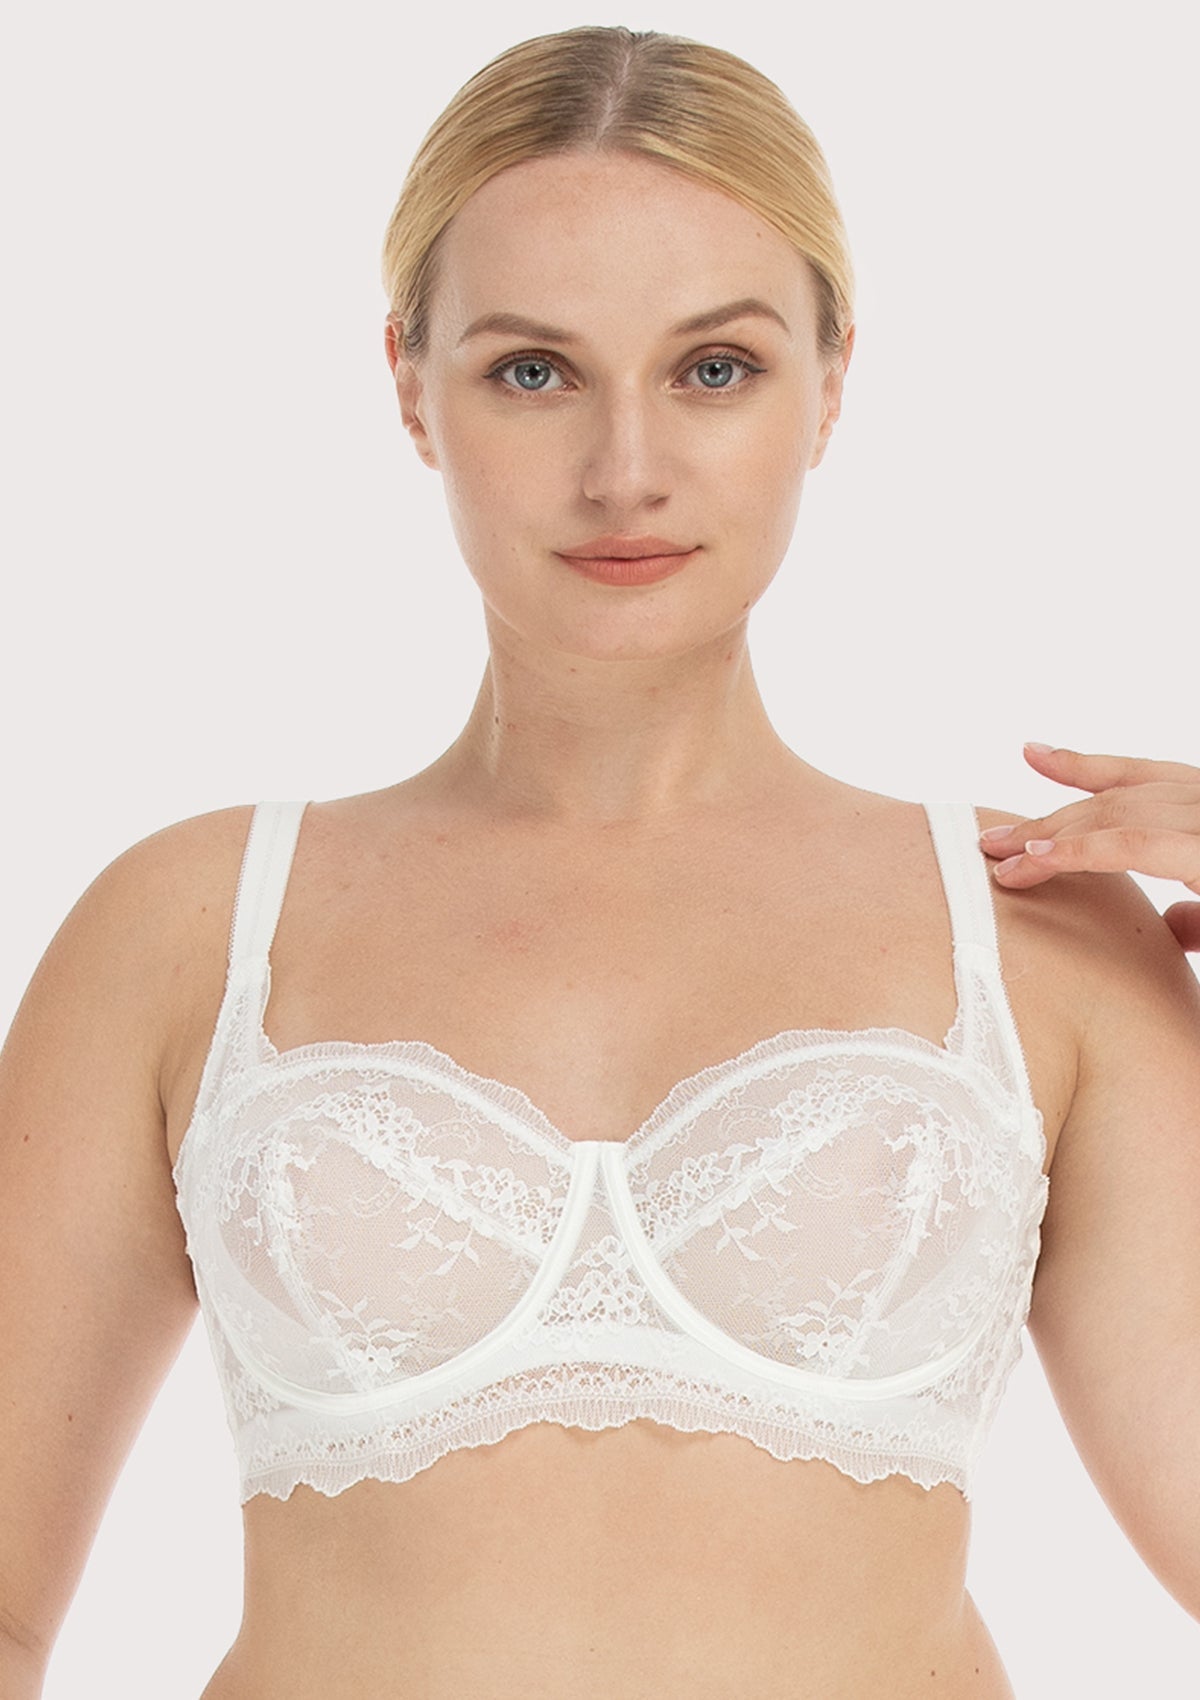 HSIA I Do Floral Lace Bridal Balconette Beautiful Bra For Special Day - Pink / 36 / DDD/F